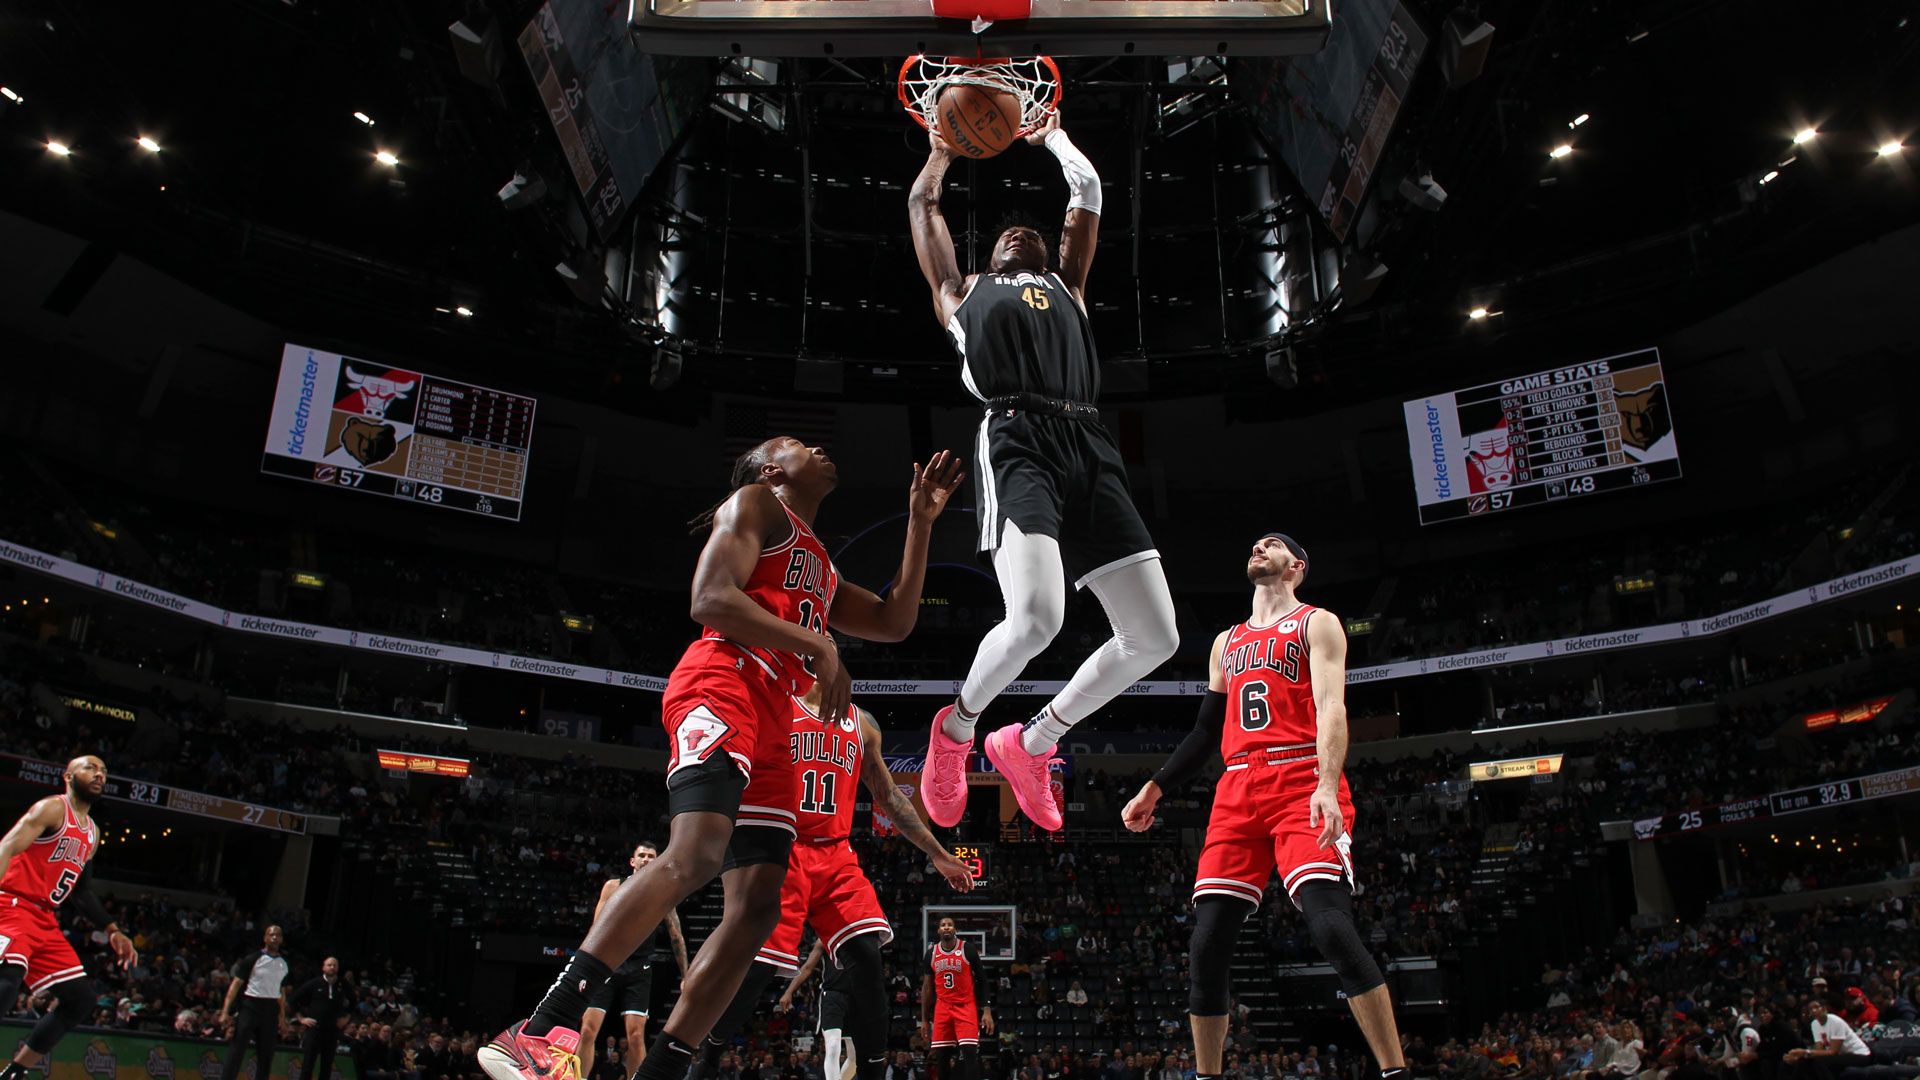 MEMPHIS, TN - FEBRUARY 8: GG Jackson #45 of the Memphis Grizzlies dunks the ball during the game against the Chicago Bulls on February 8, 2024 at FedExForum in Memphis, Tennessee.